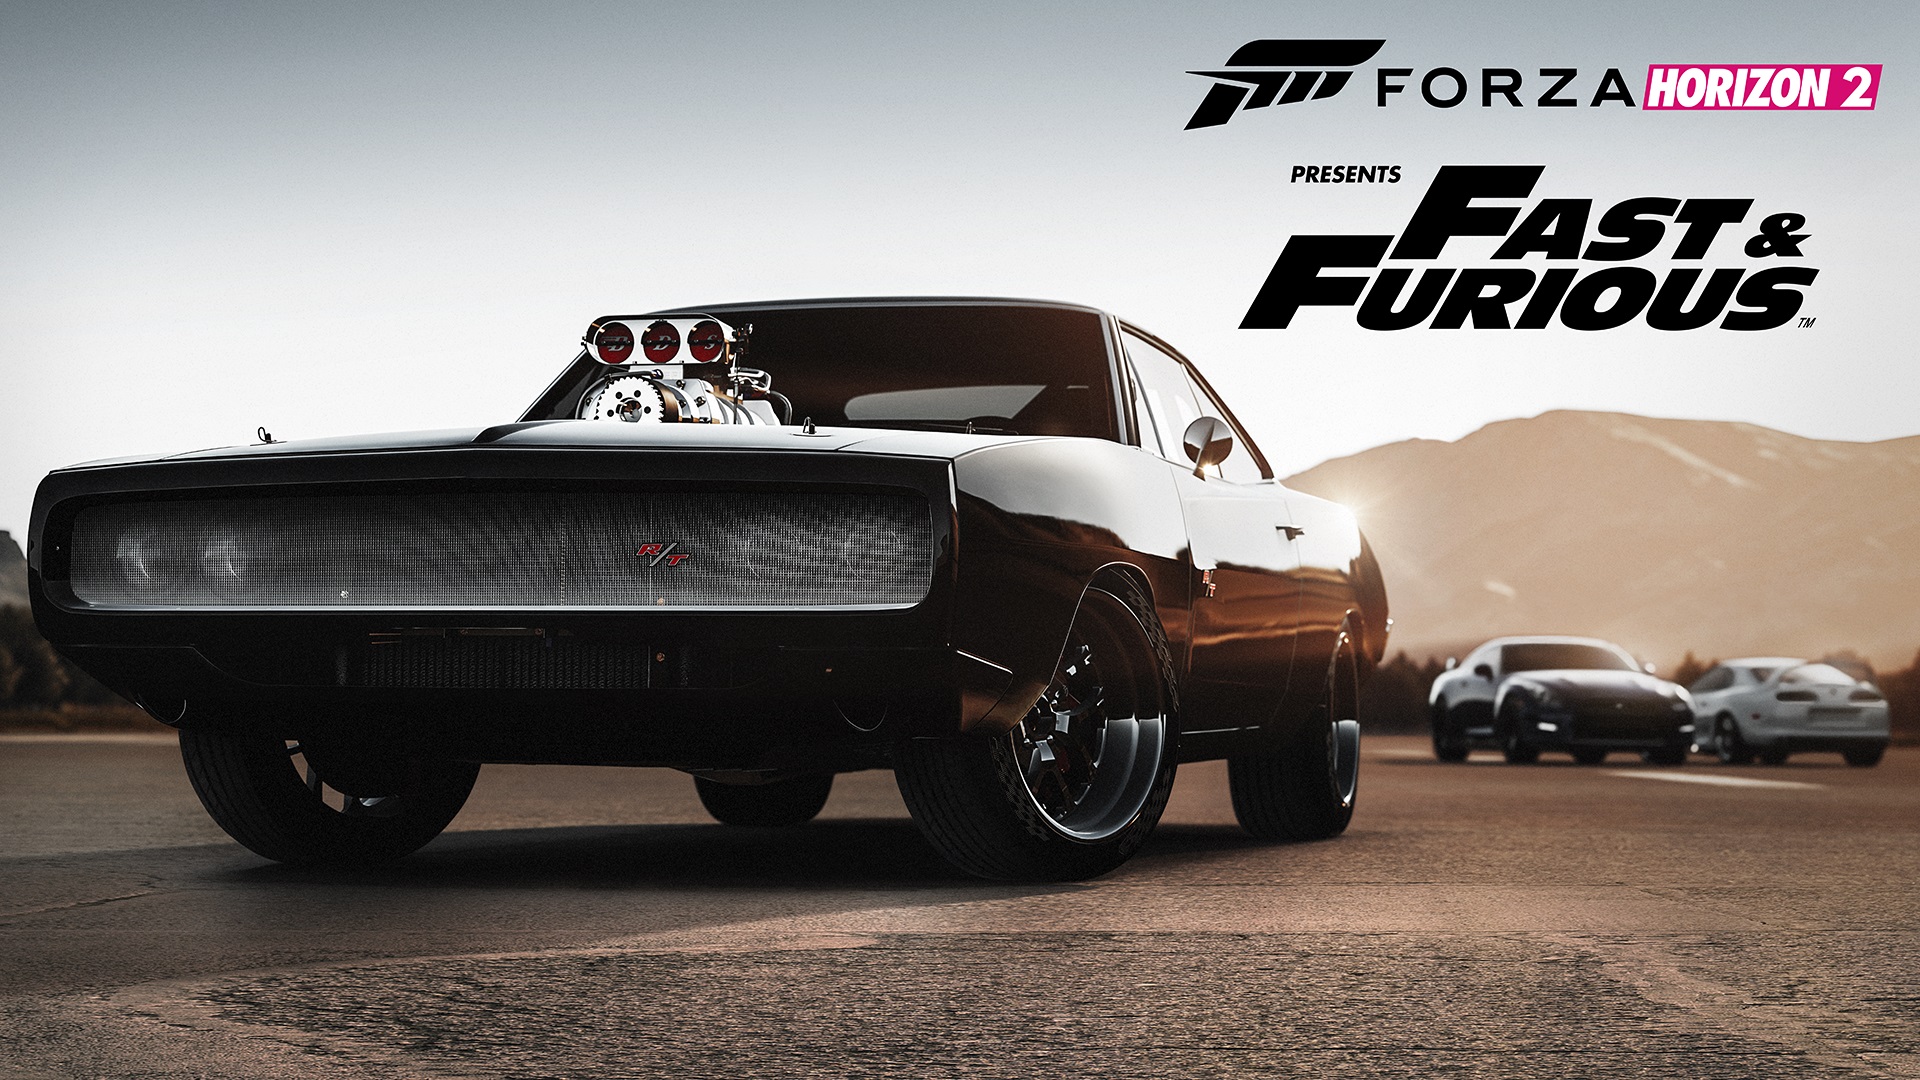 download fast and furious xbox one game for free